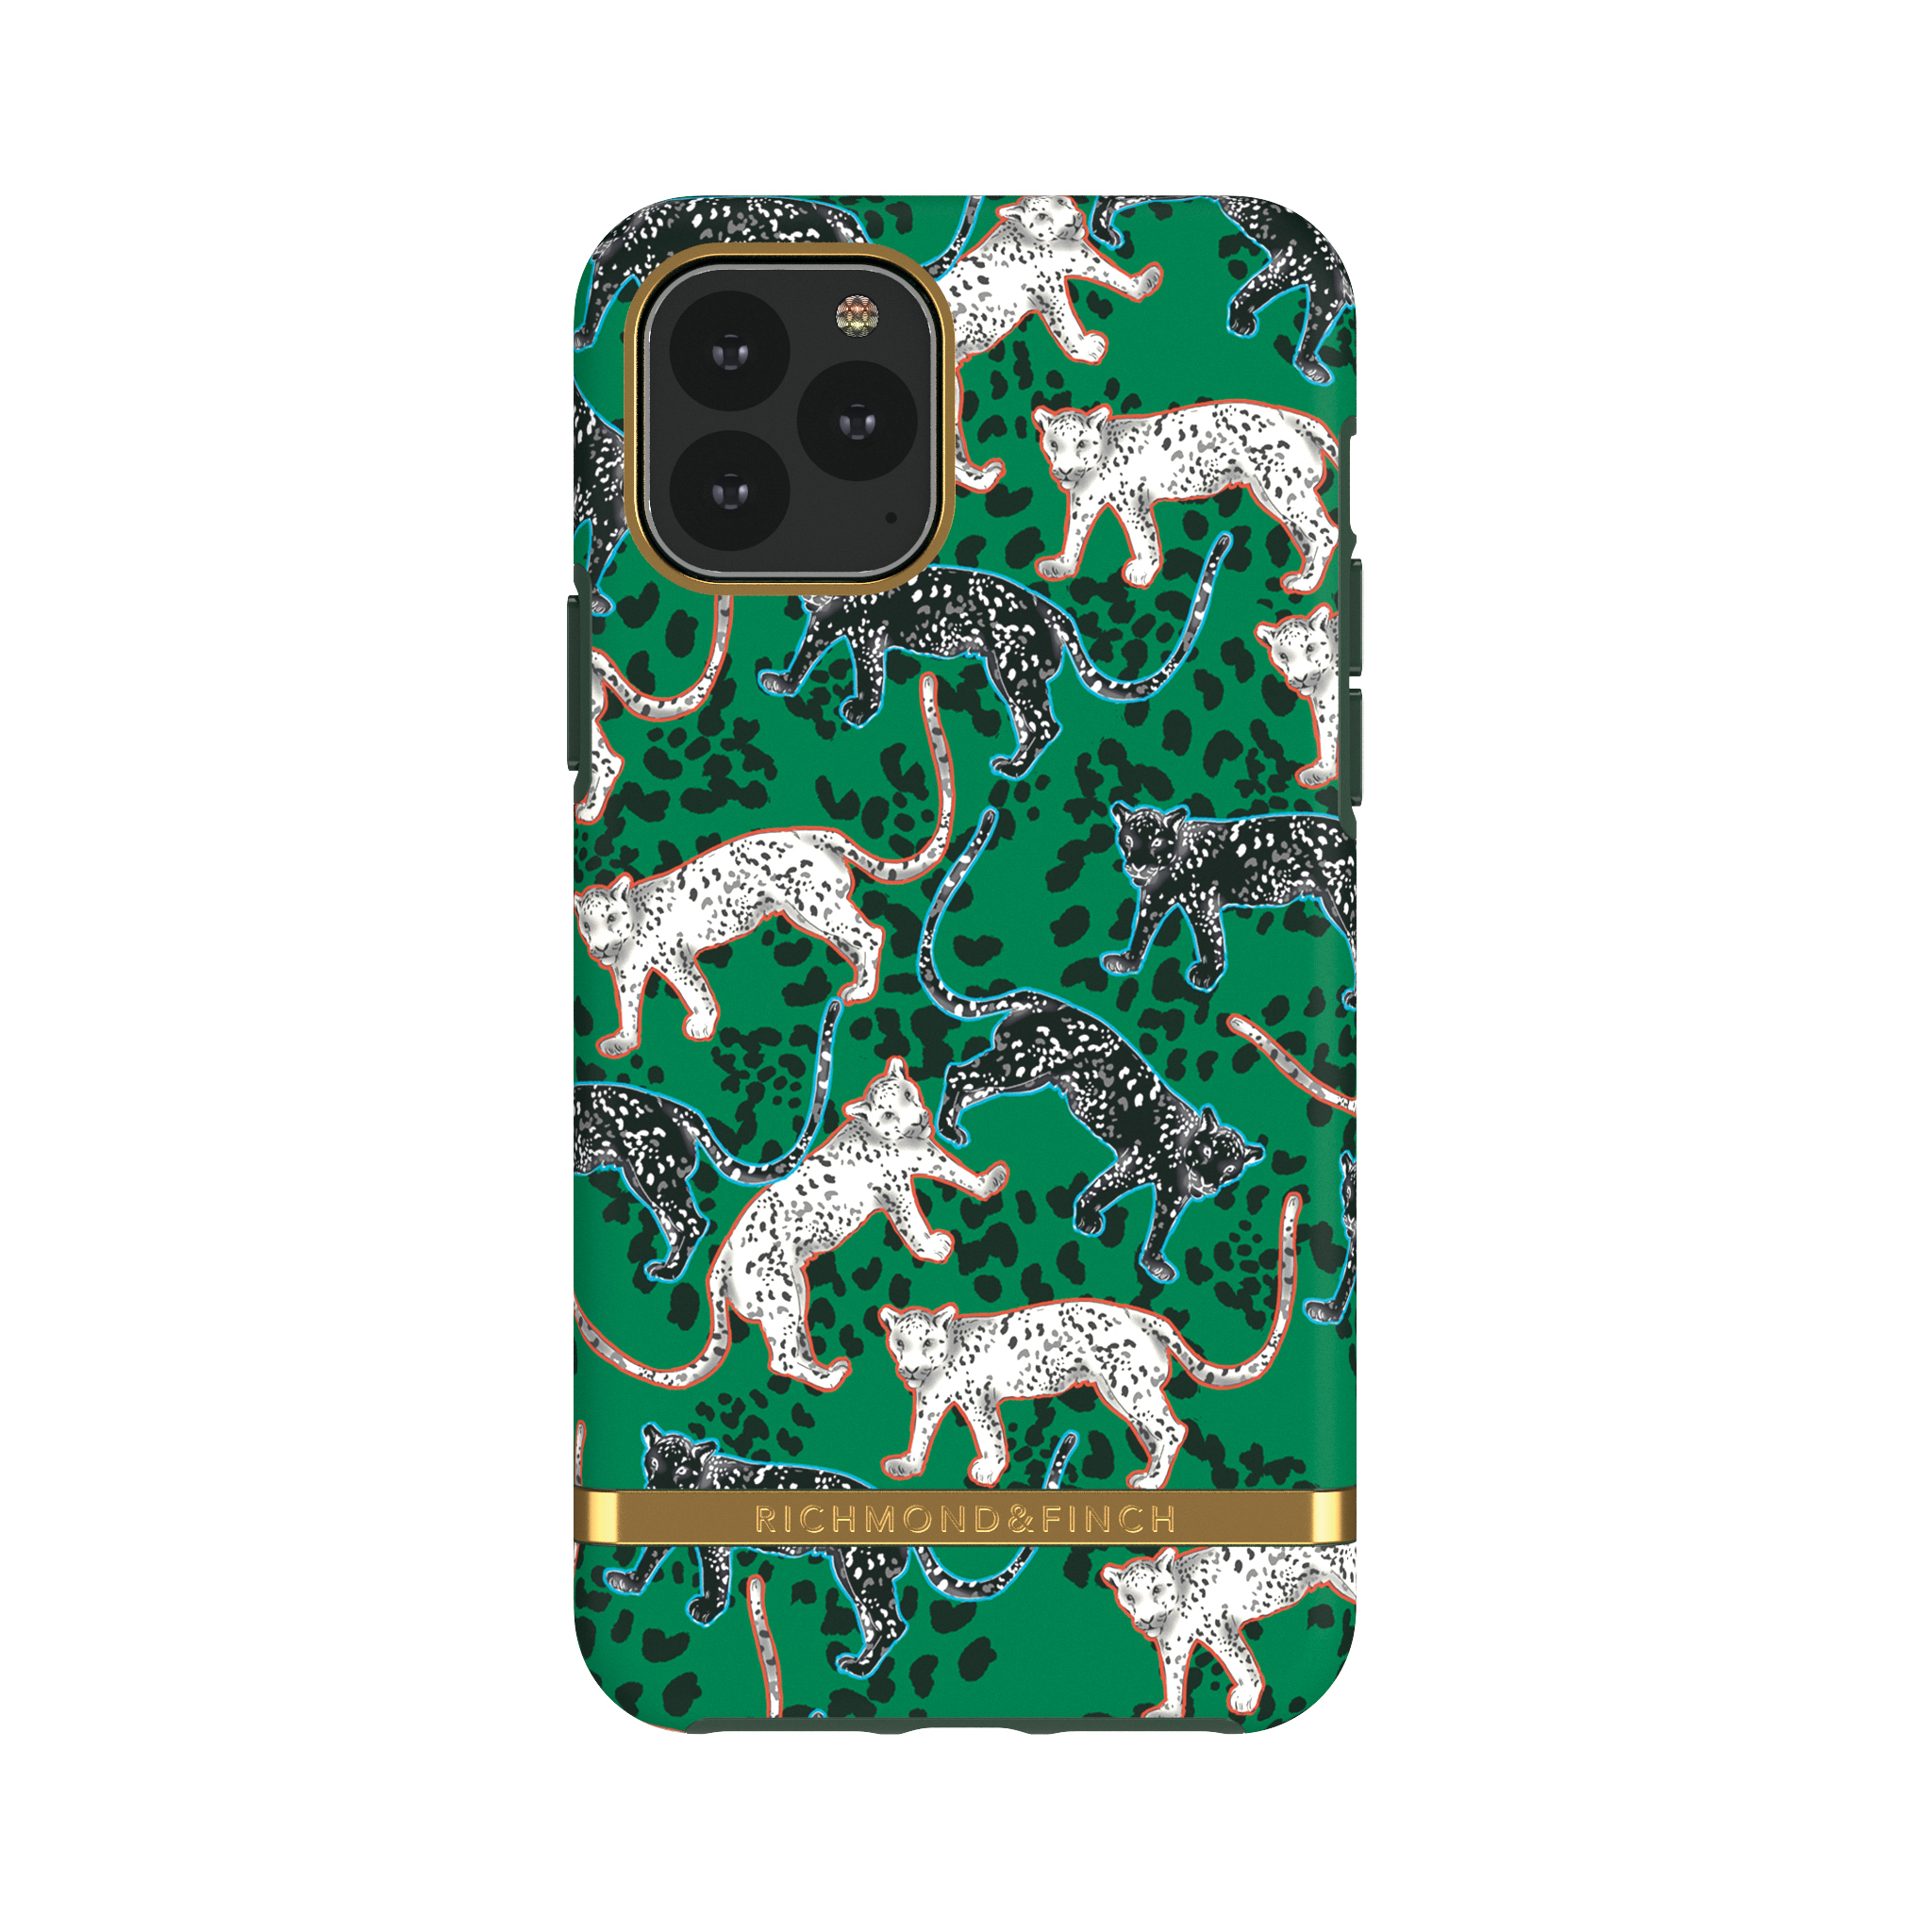 RICHMOND & FINCH Green iPhone PRO MAX, Pro 11 Max, GREEN IPHONE 11 APPLE, Leopard Backcover